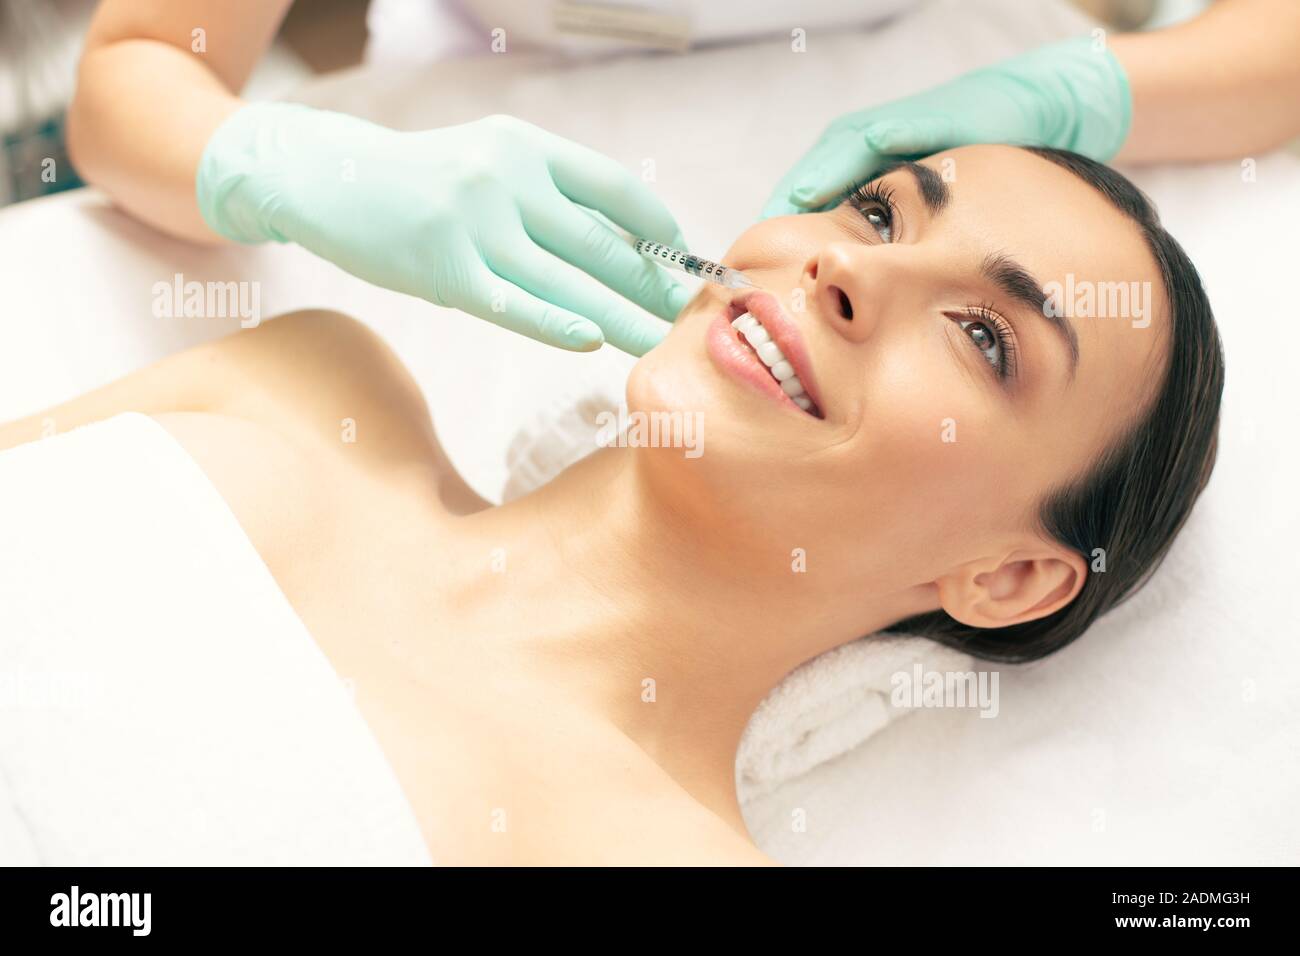 Close up of relaxed woman getting injection dans sa lèvre Banque D'Images